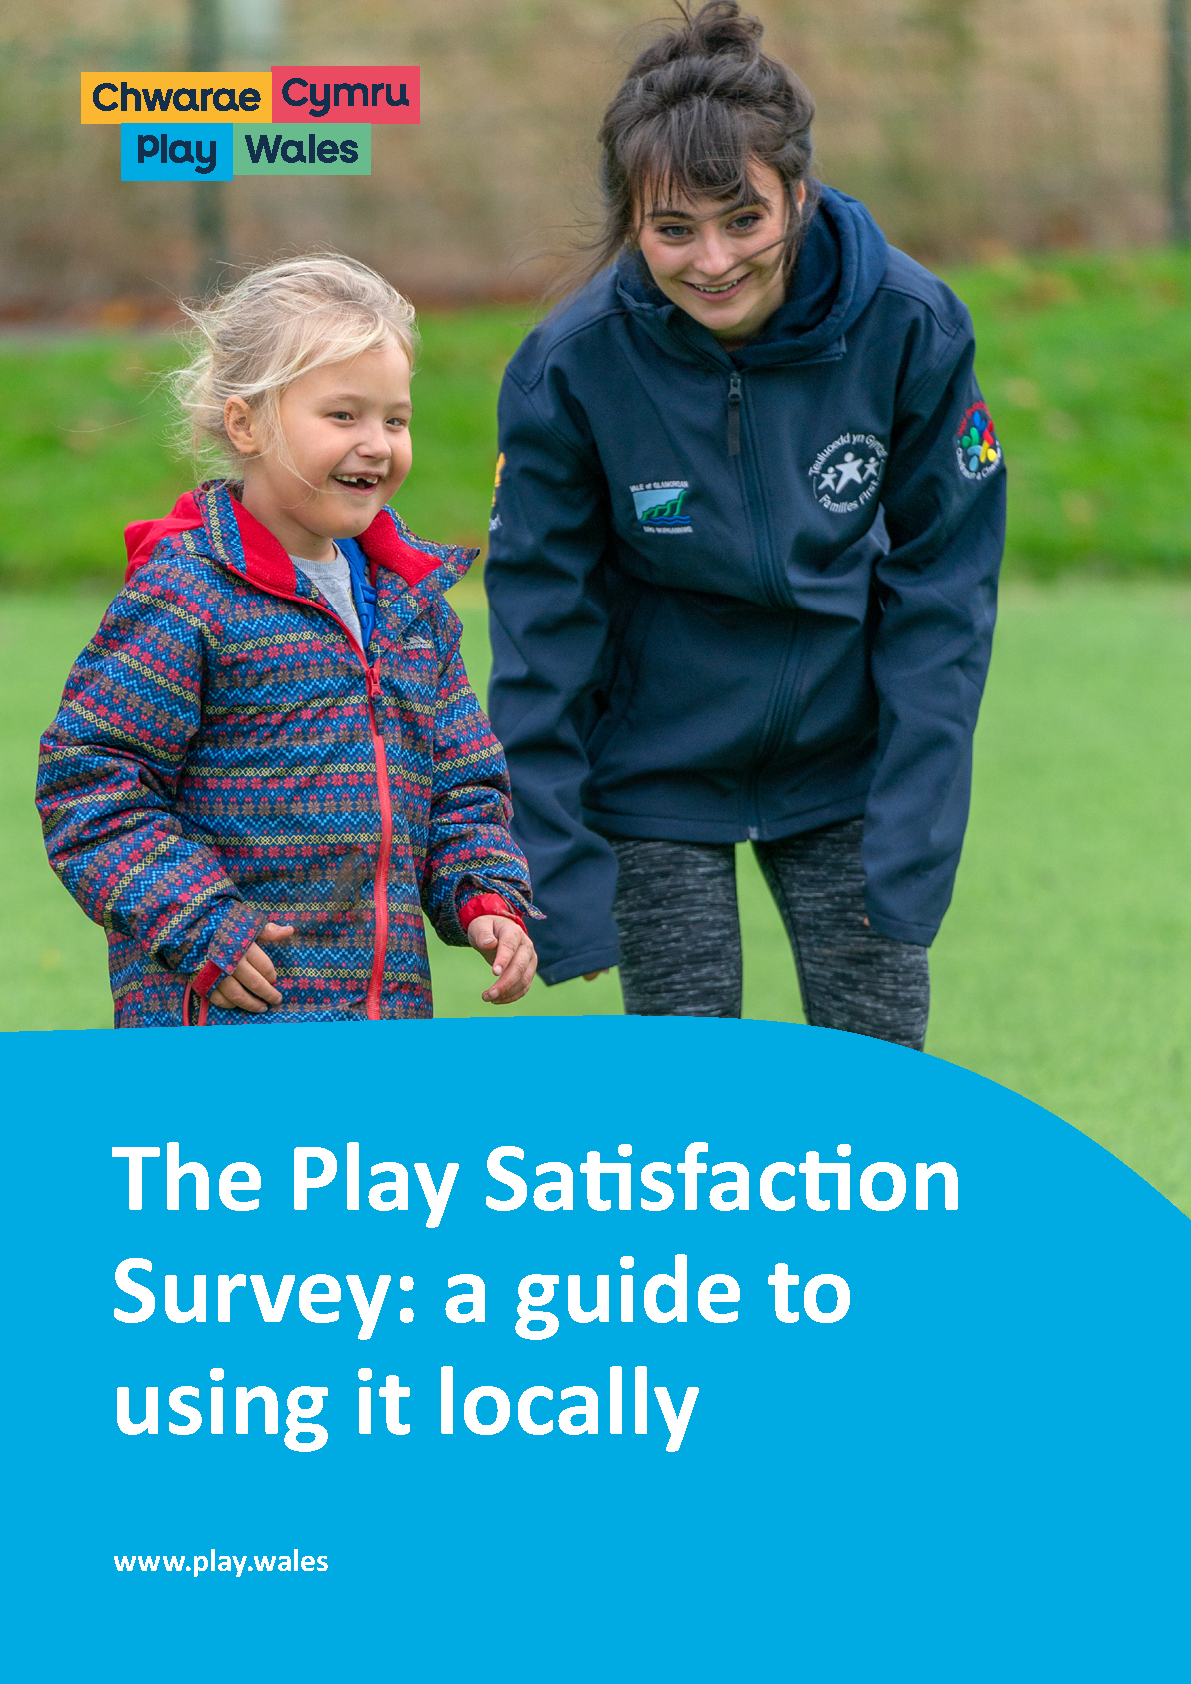 The Play Satisfaction Survey: A guide to using it locally